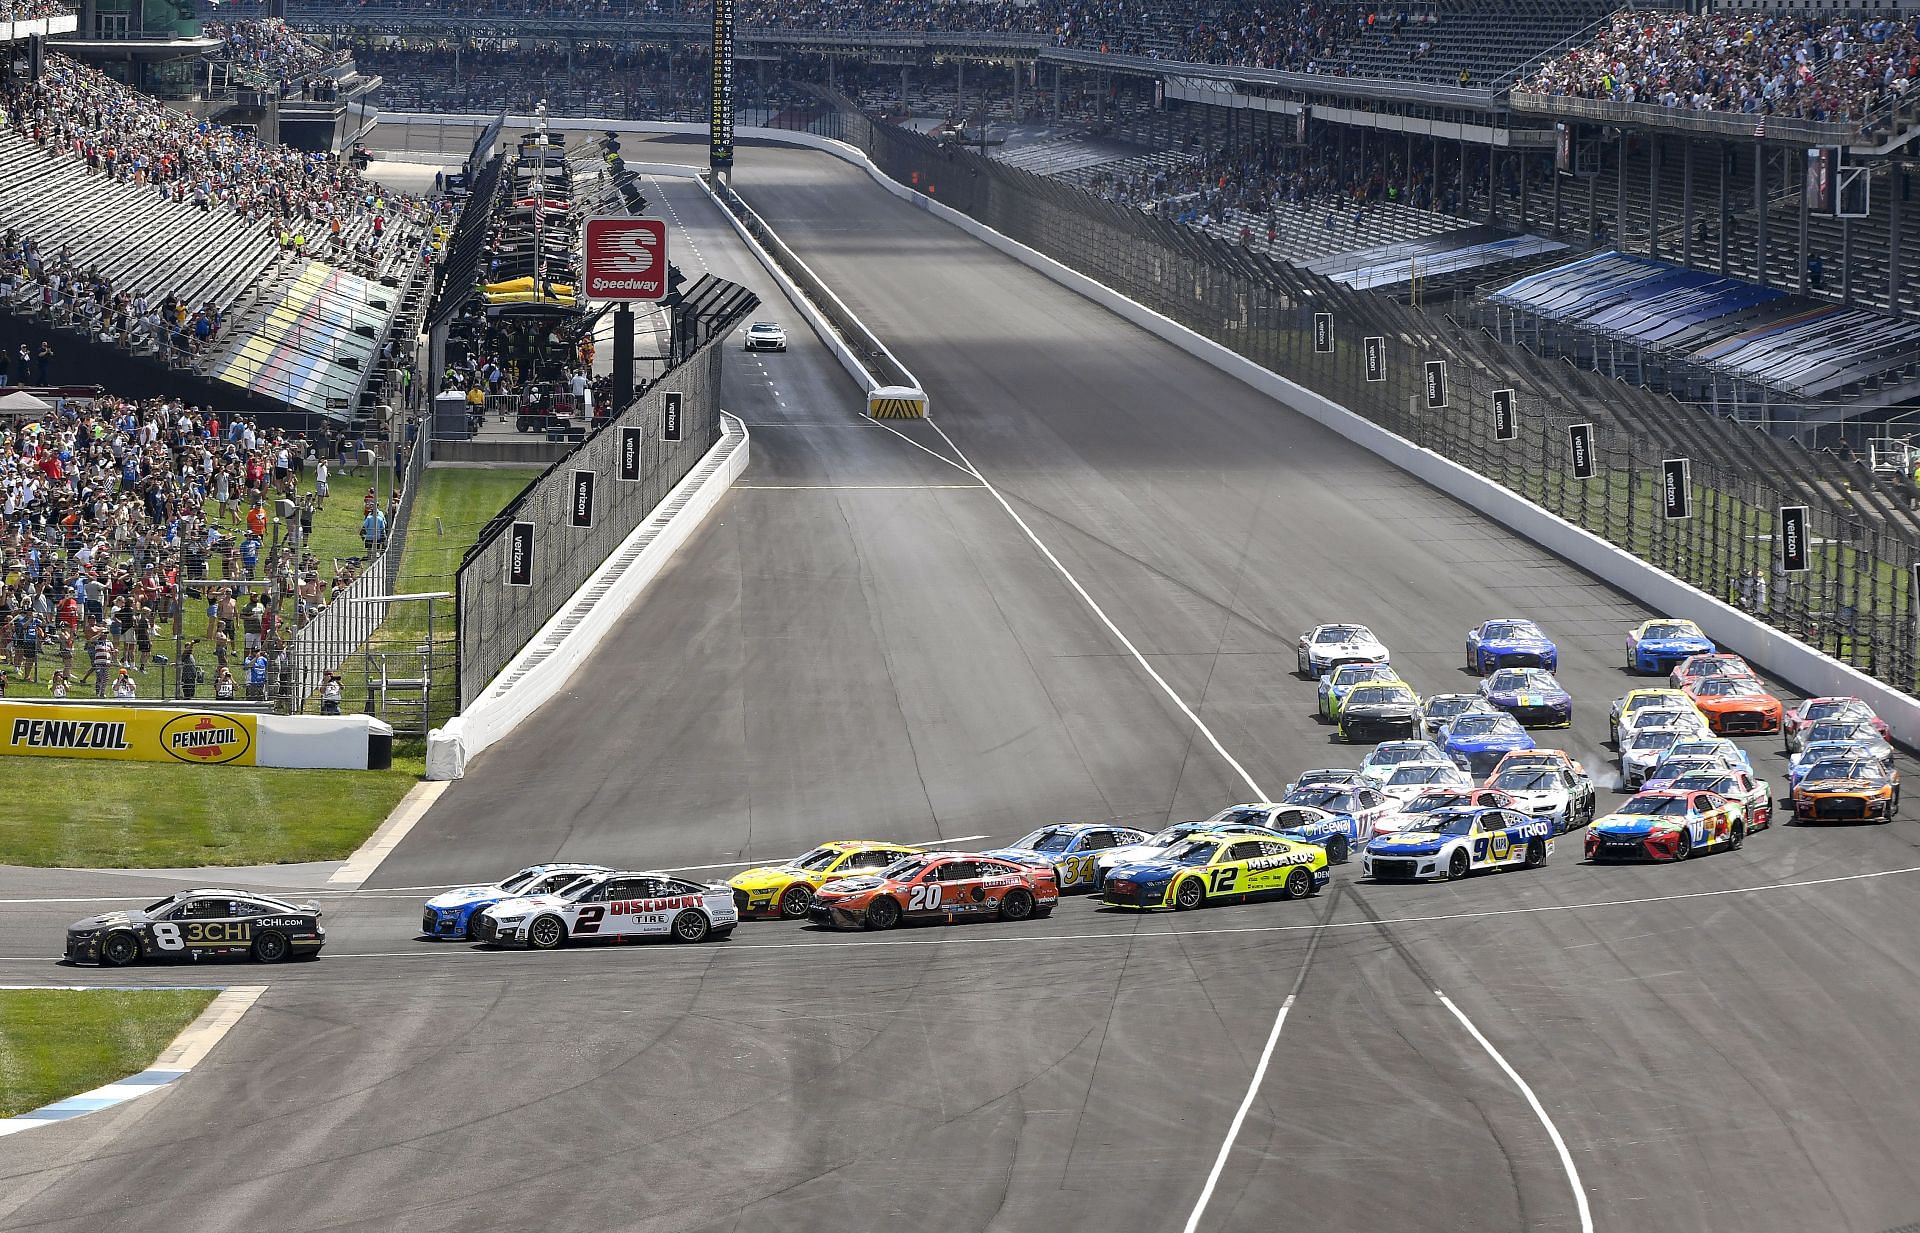 Tyler Reddick leads the field during the NASCAR Cup Series Verizon 200 at the Brickyard at Indianapolis Motor Speedway (Photo by Logan Riely/Getty Images)